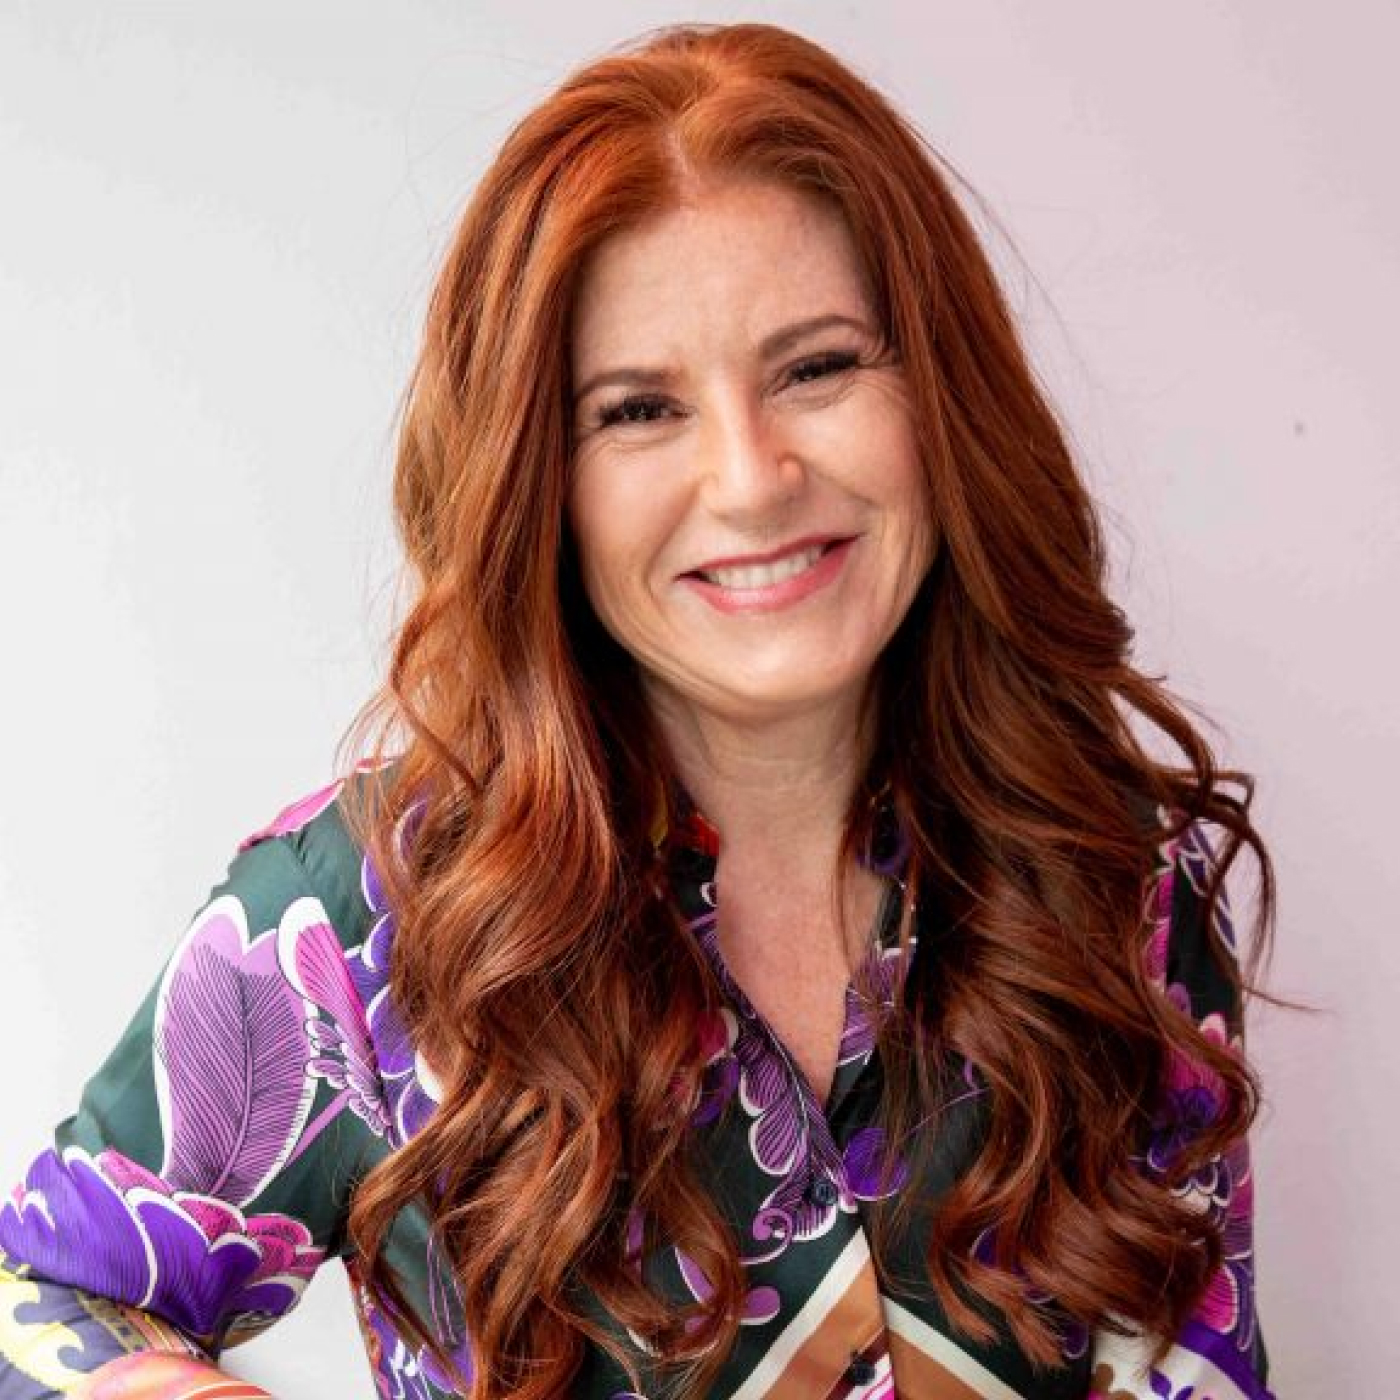 A Tale of Employment to Award-Winning Entrepreneur with Kara Goldin, Founder, and CEO of Hint